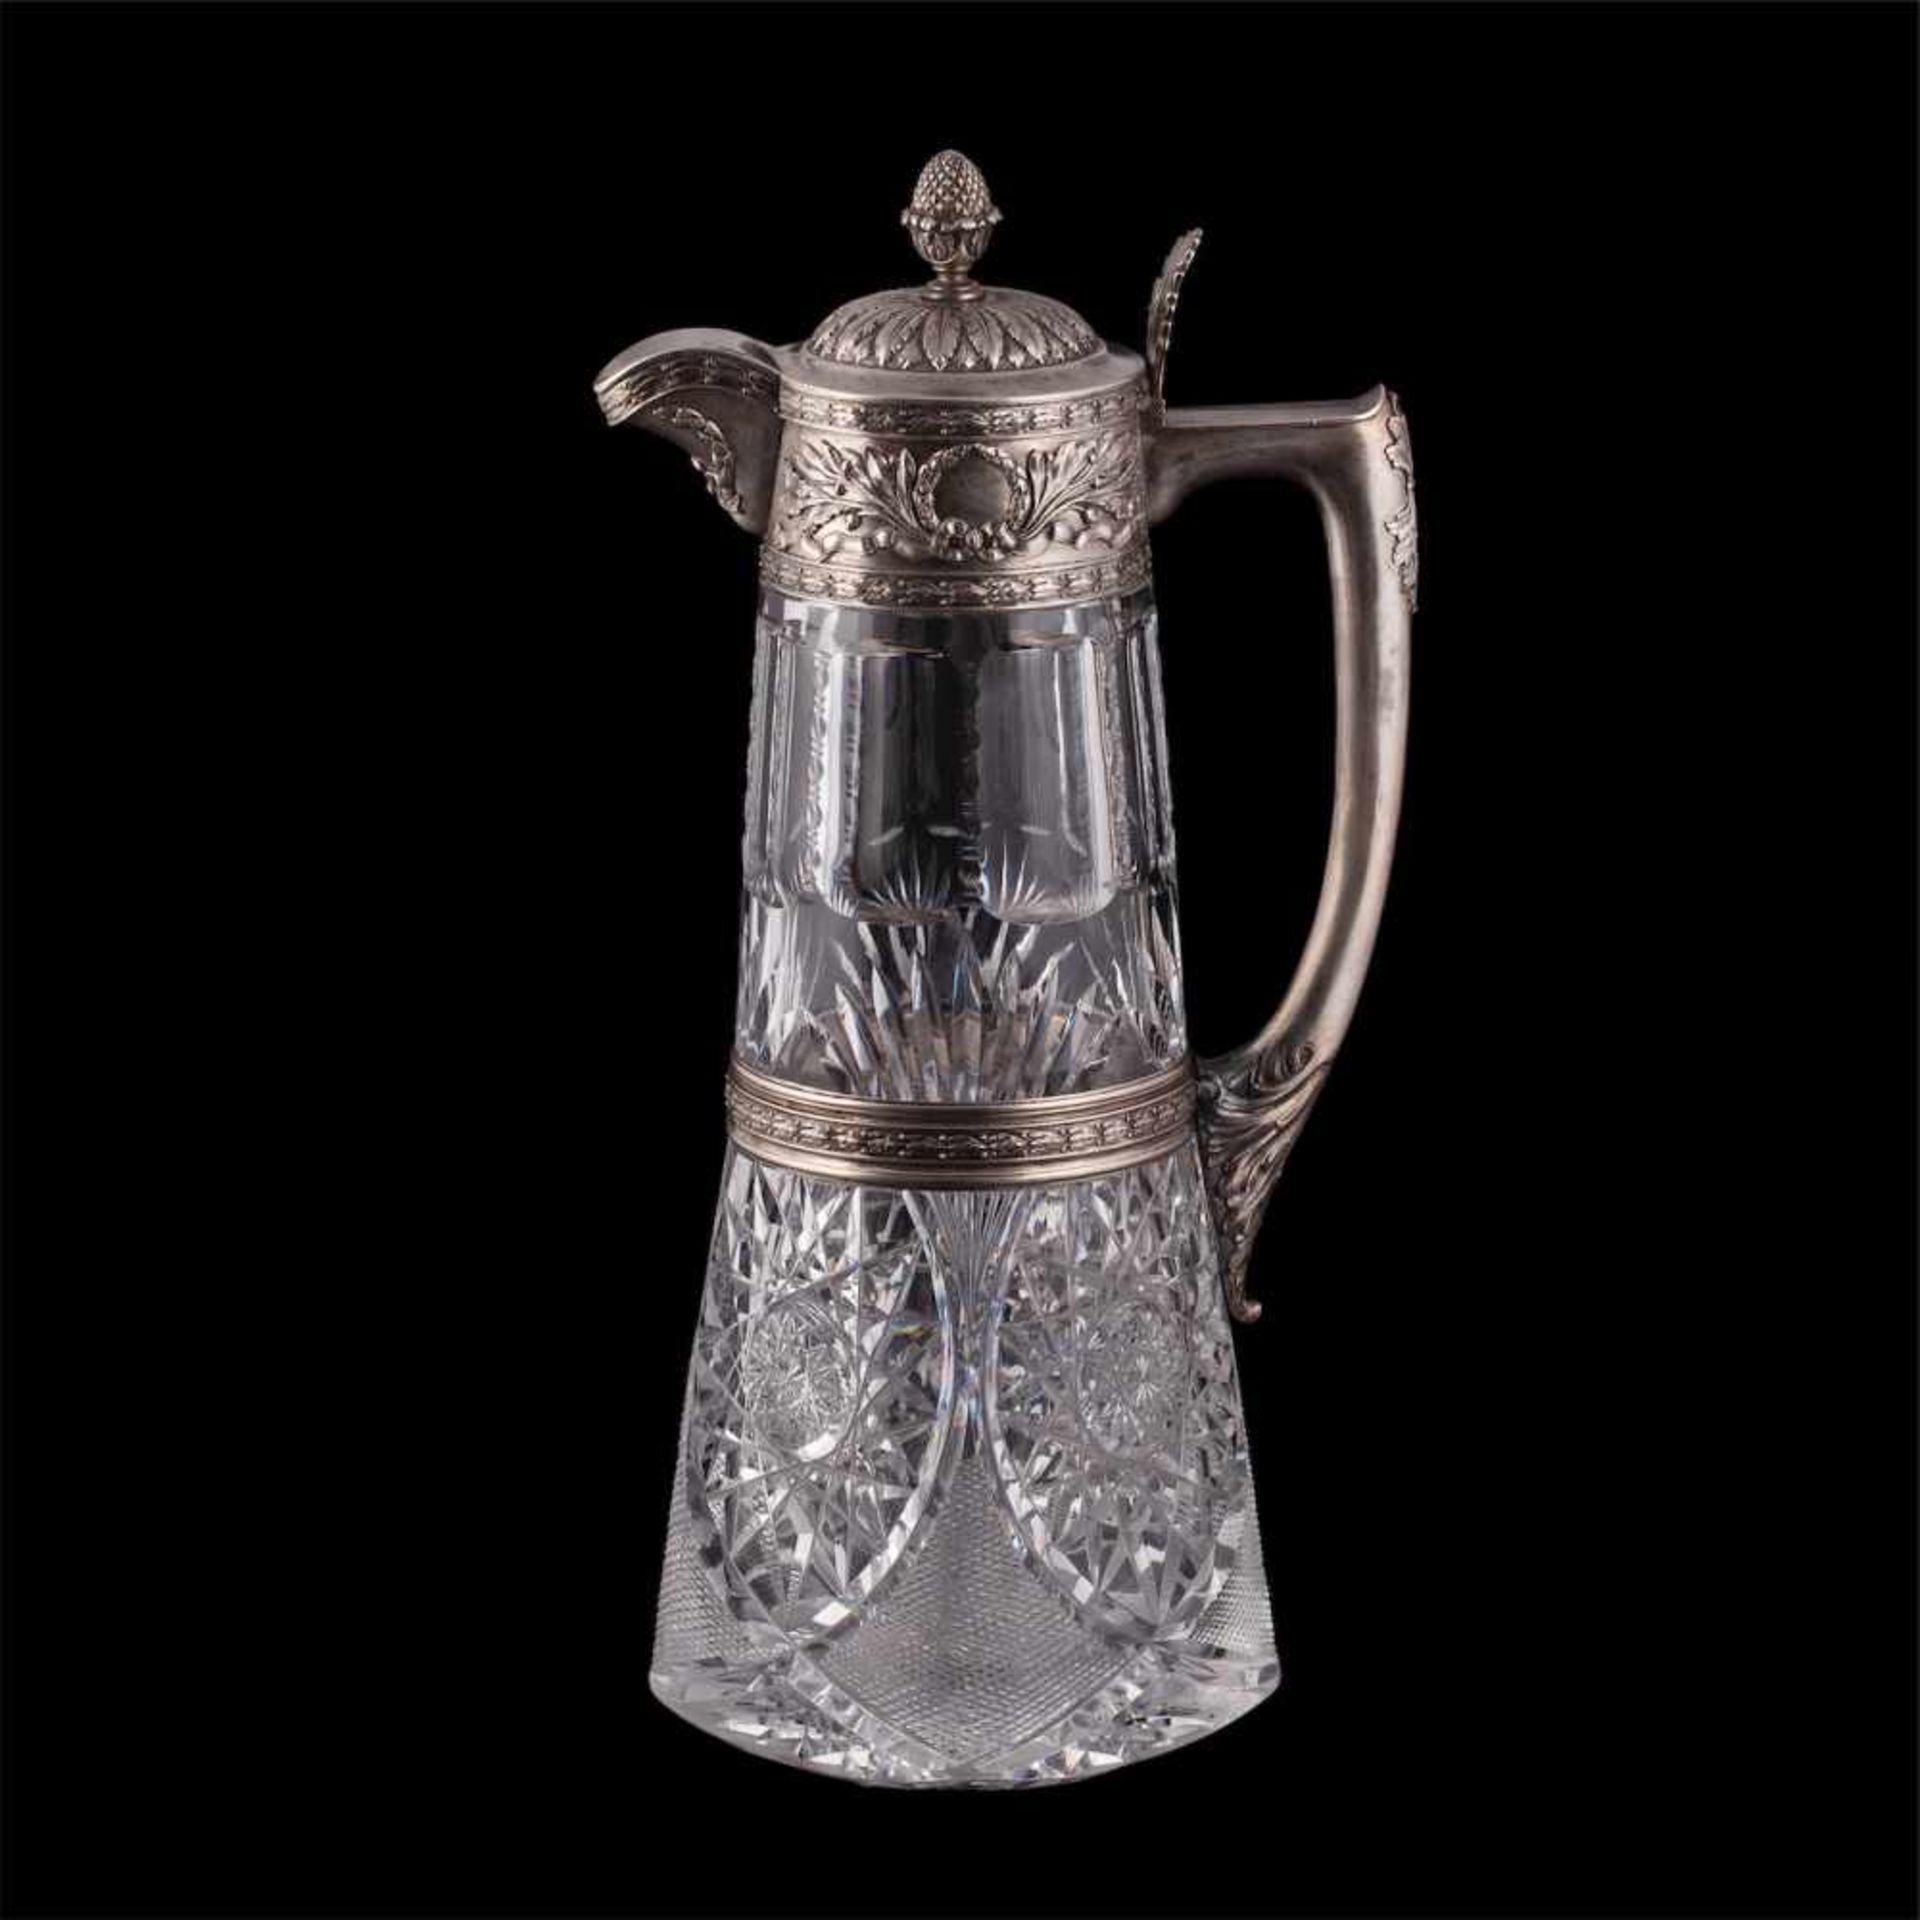 A Russian grand silver-gilt and cut-glass carafeA Russian grand silver-gilt and cut-glass carafe